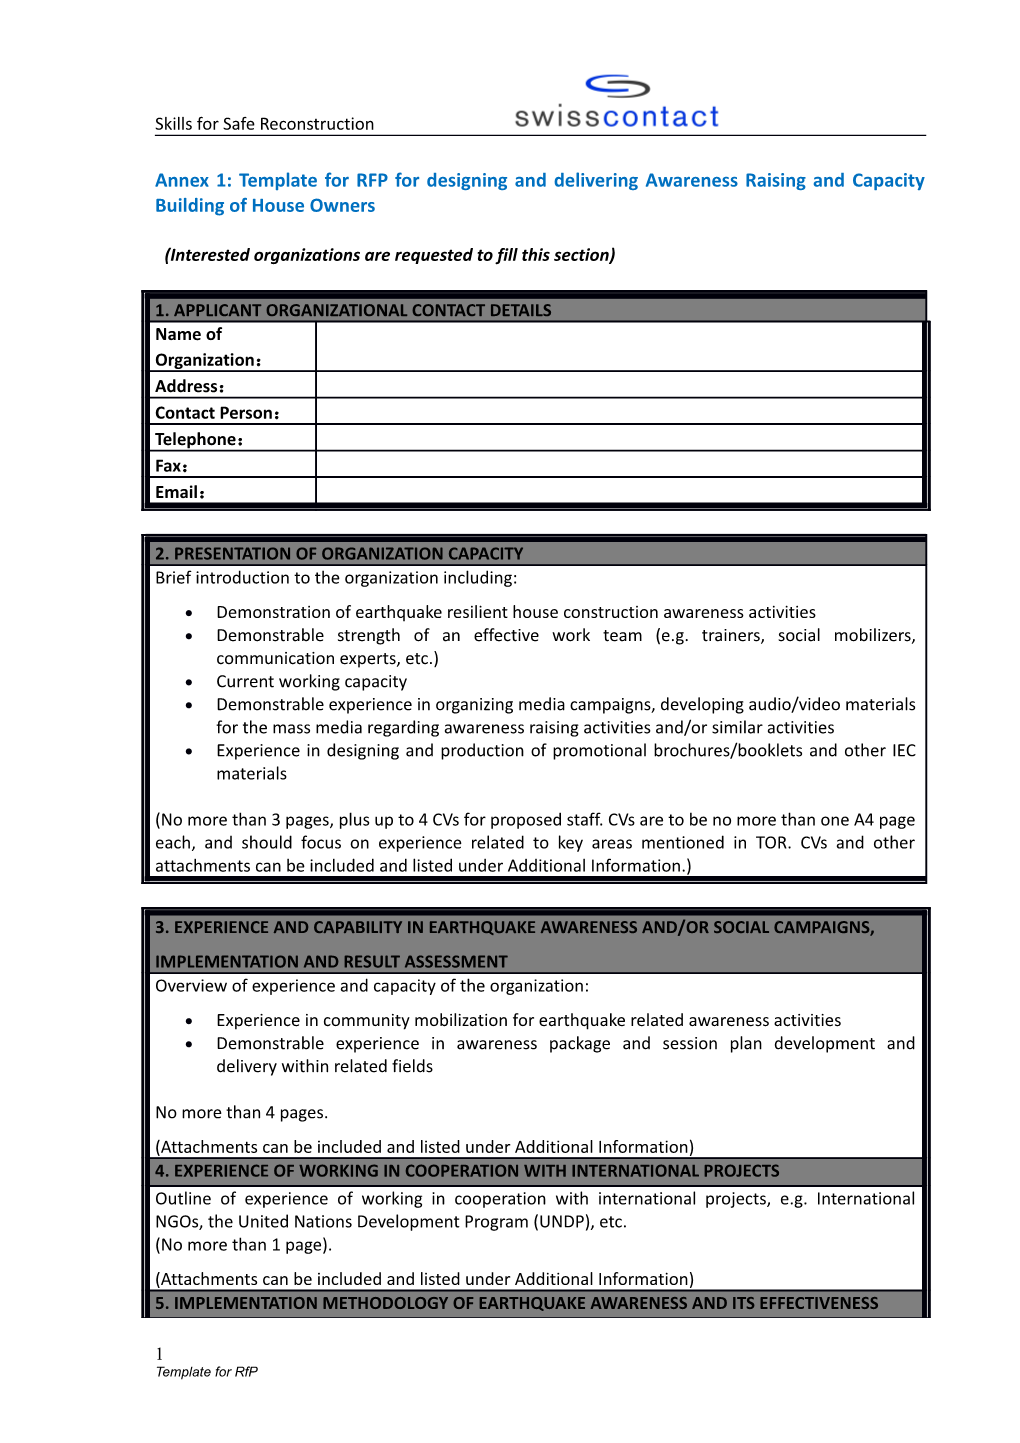 Standard Format and Guidelines for EOI